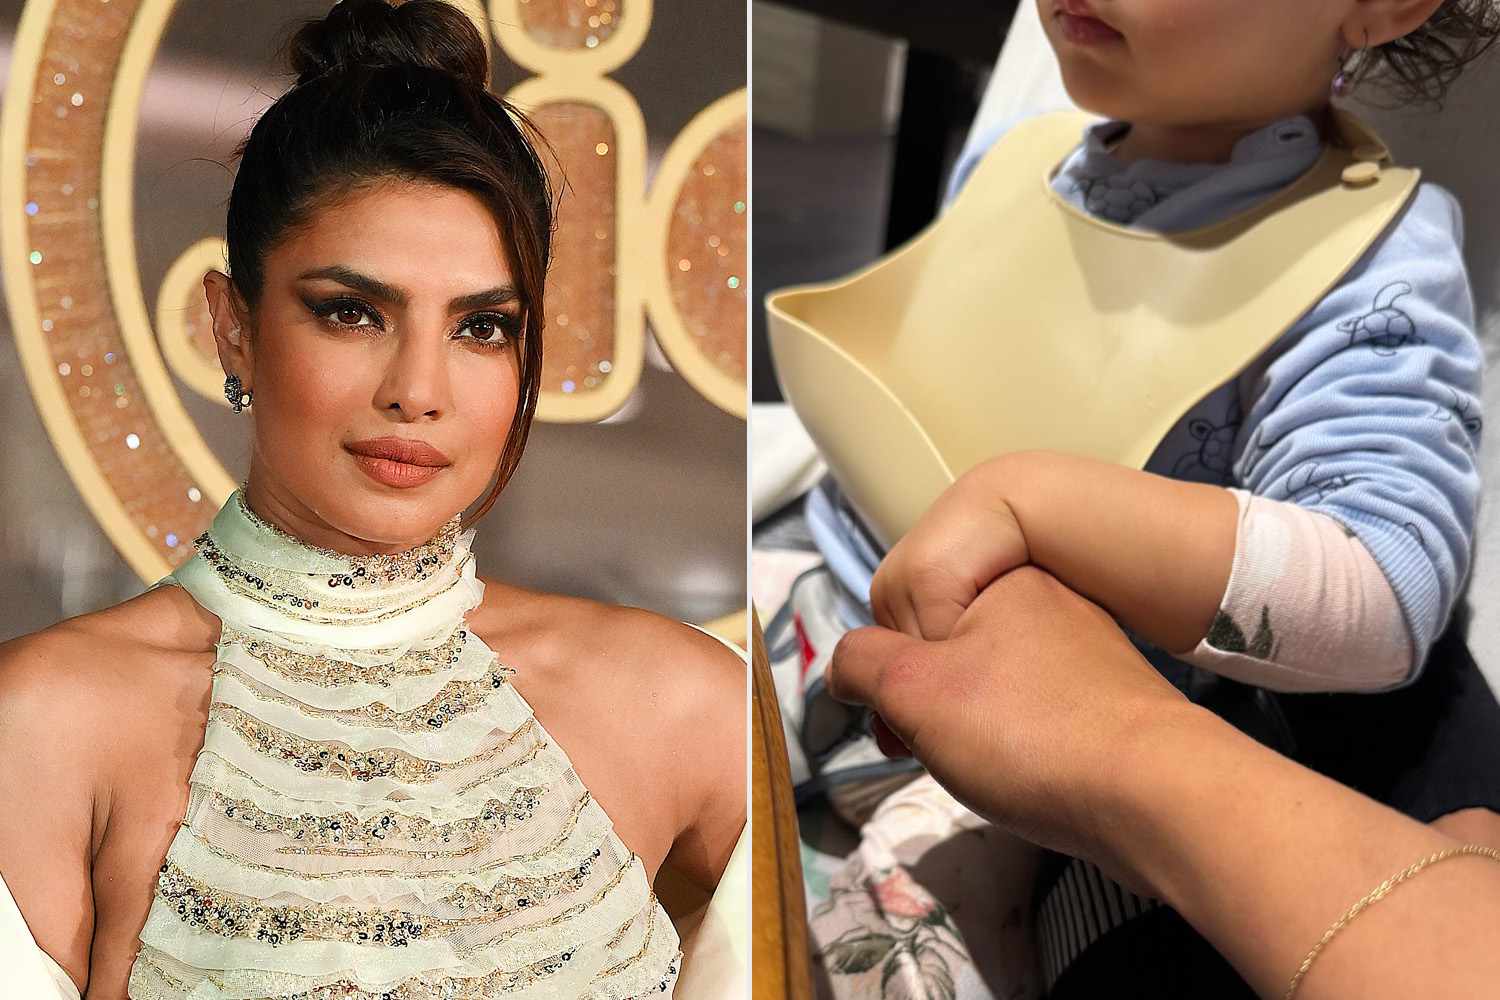 Priyanka Chopra Calls Daughter Malti 'Exceptional' as She Shares a Sweet Snap of the Toddler Holding Her Hand